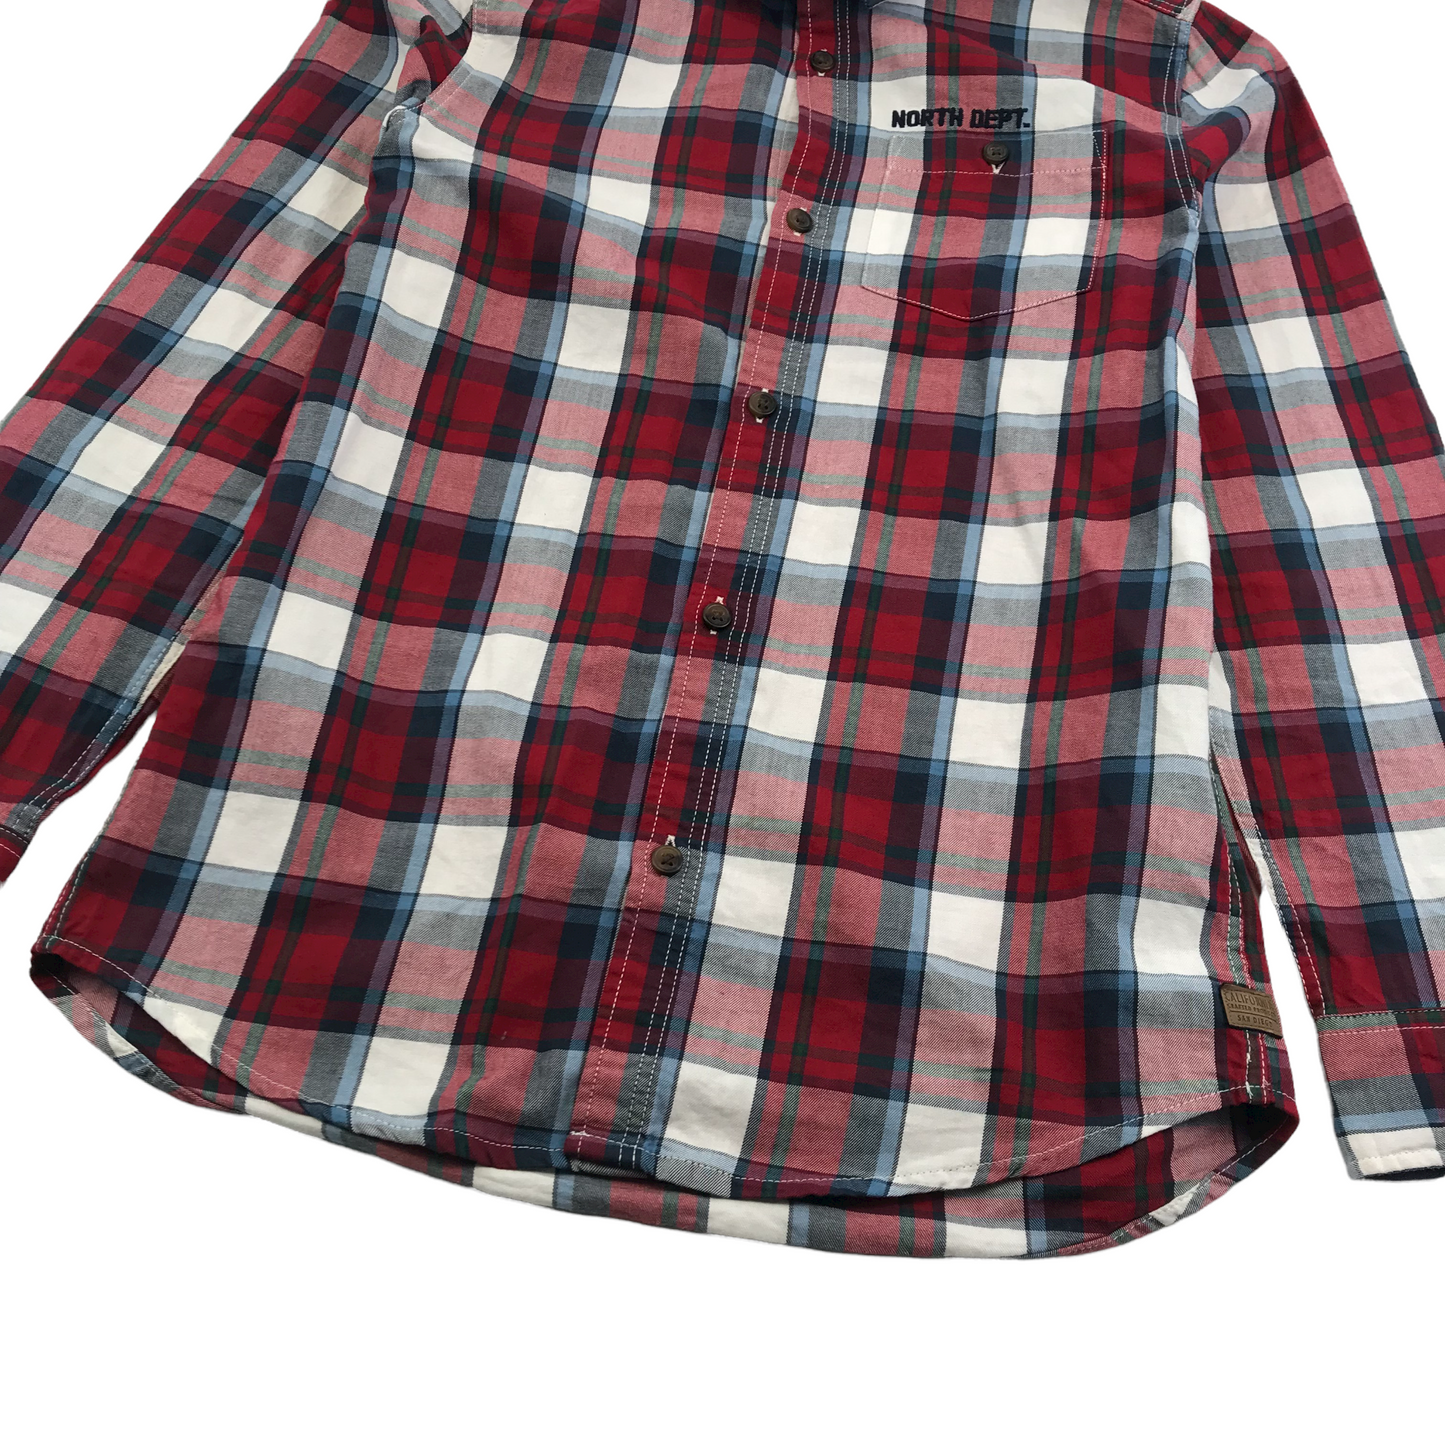 H&M Red Checked Shirt Age 11